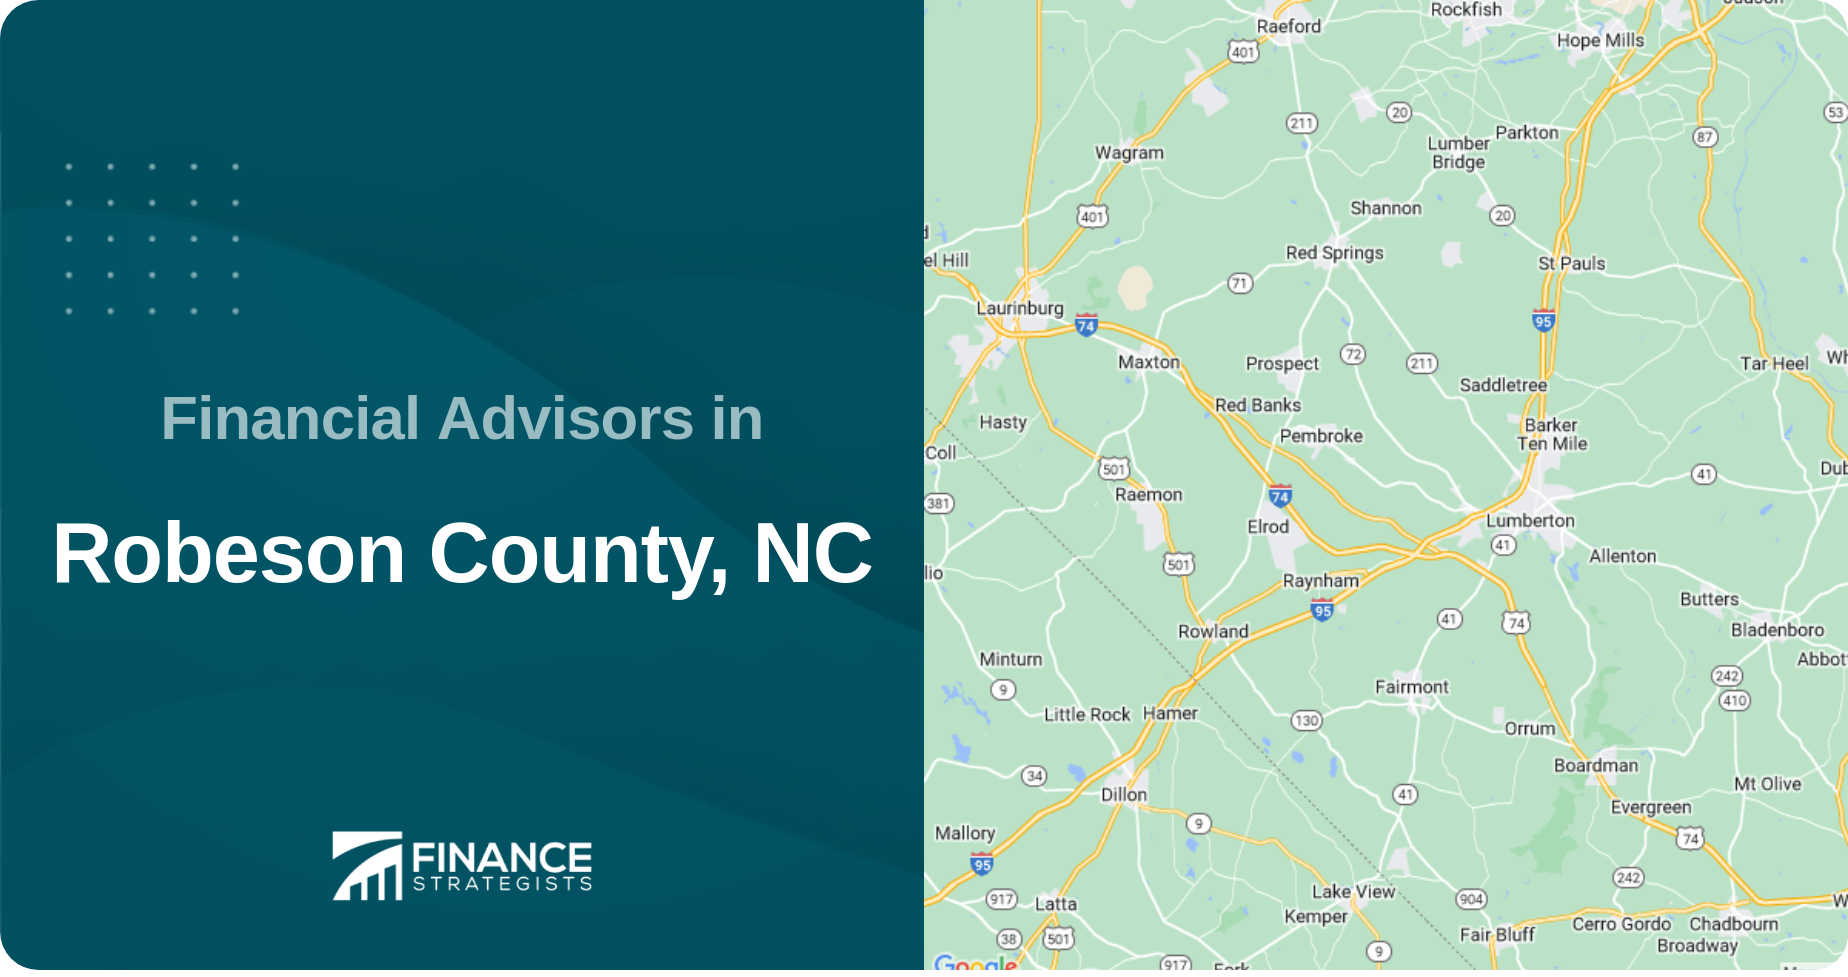 Financial Advisors in Robeson County, NC